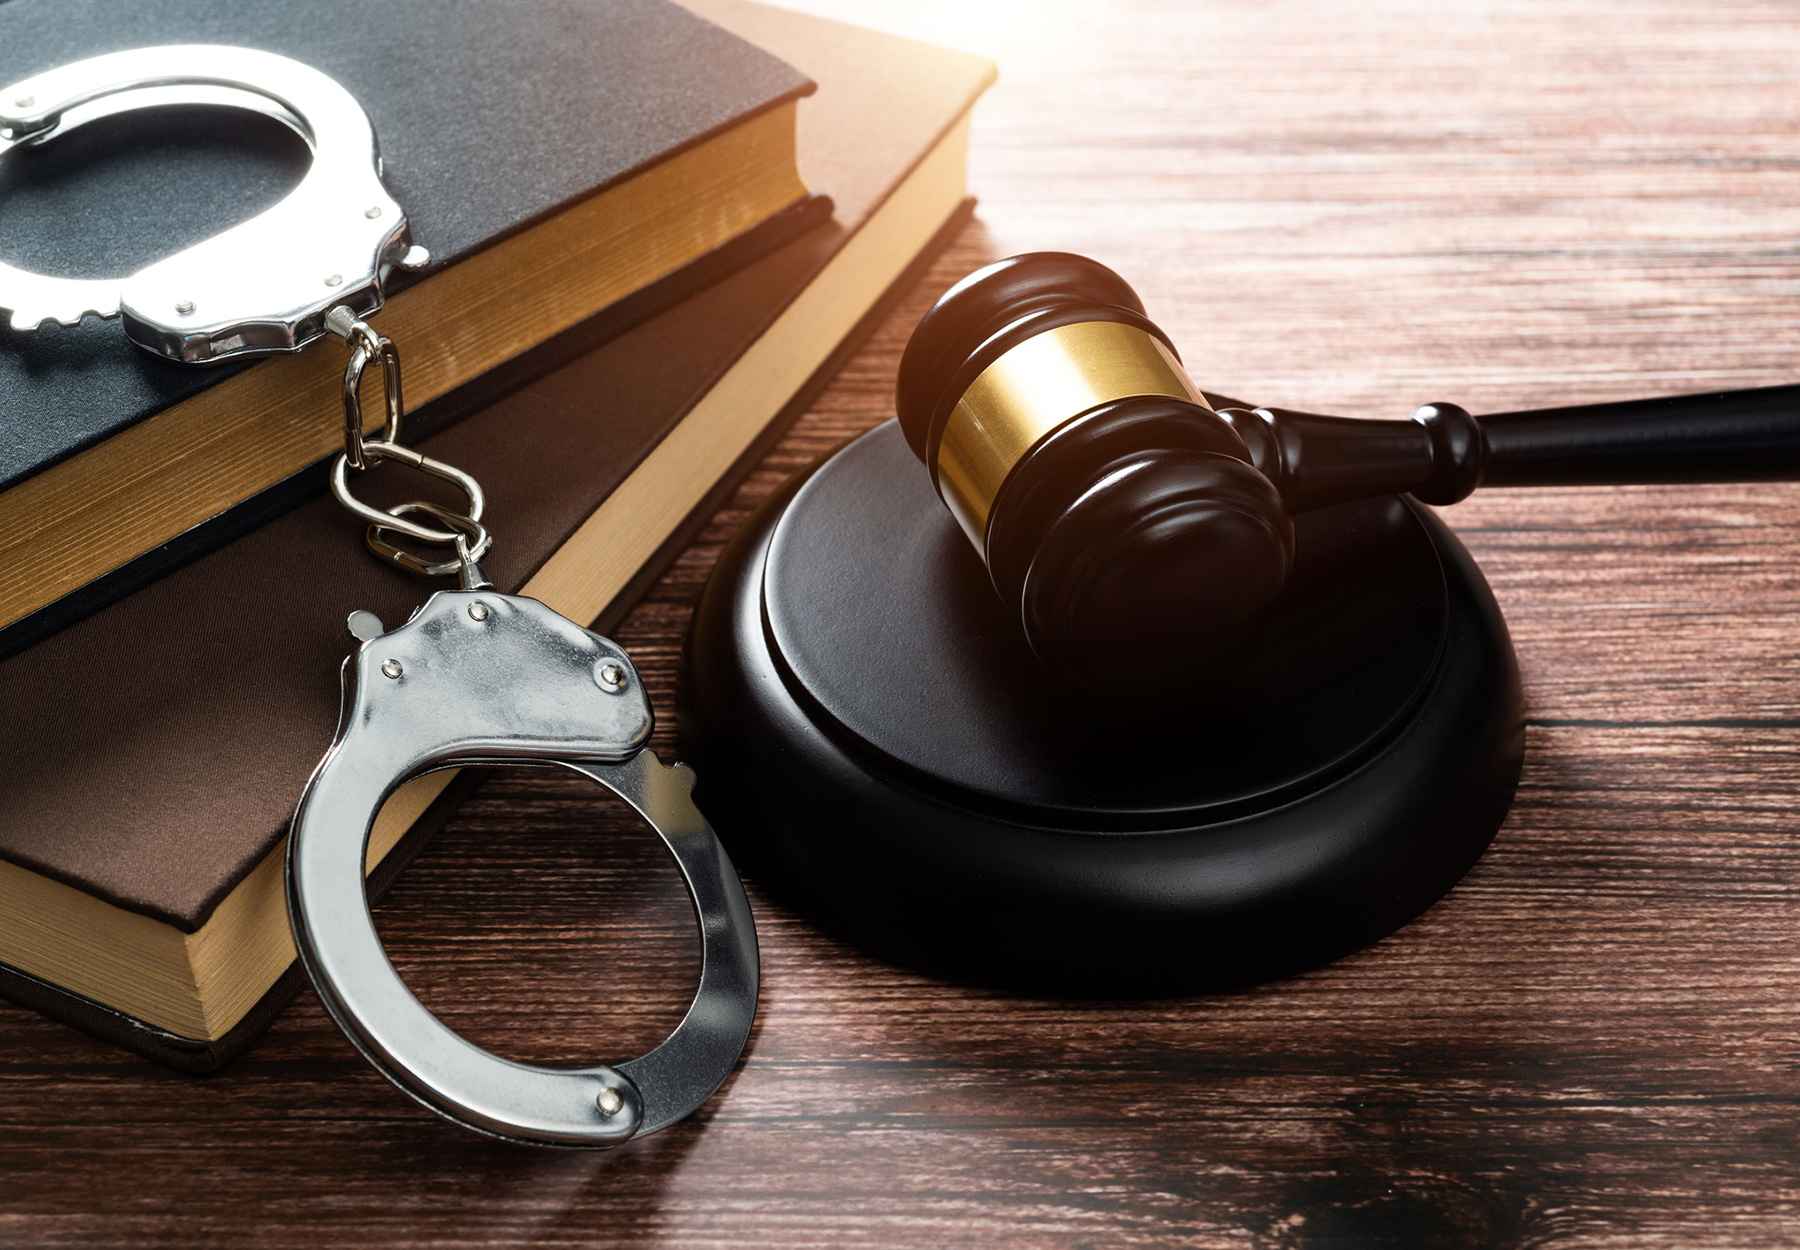 stock image of gavel, handcuffs, and book on wooden table to show concept of guilty verdict